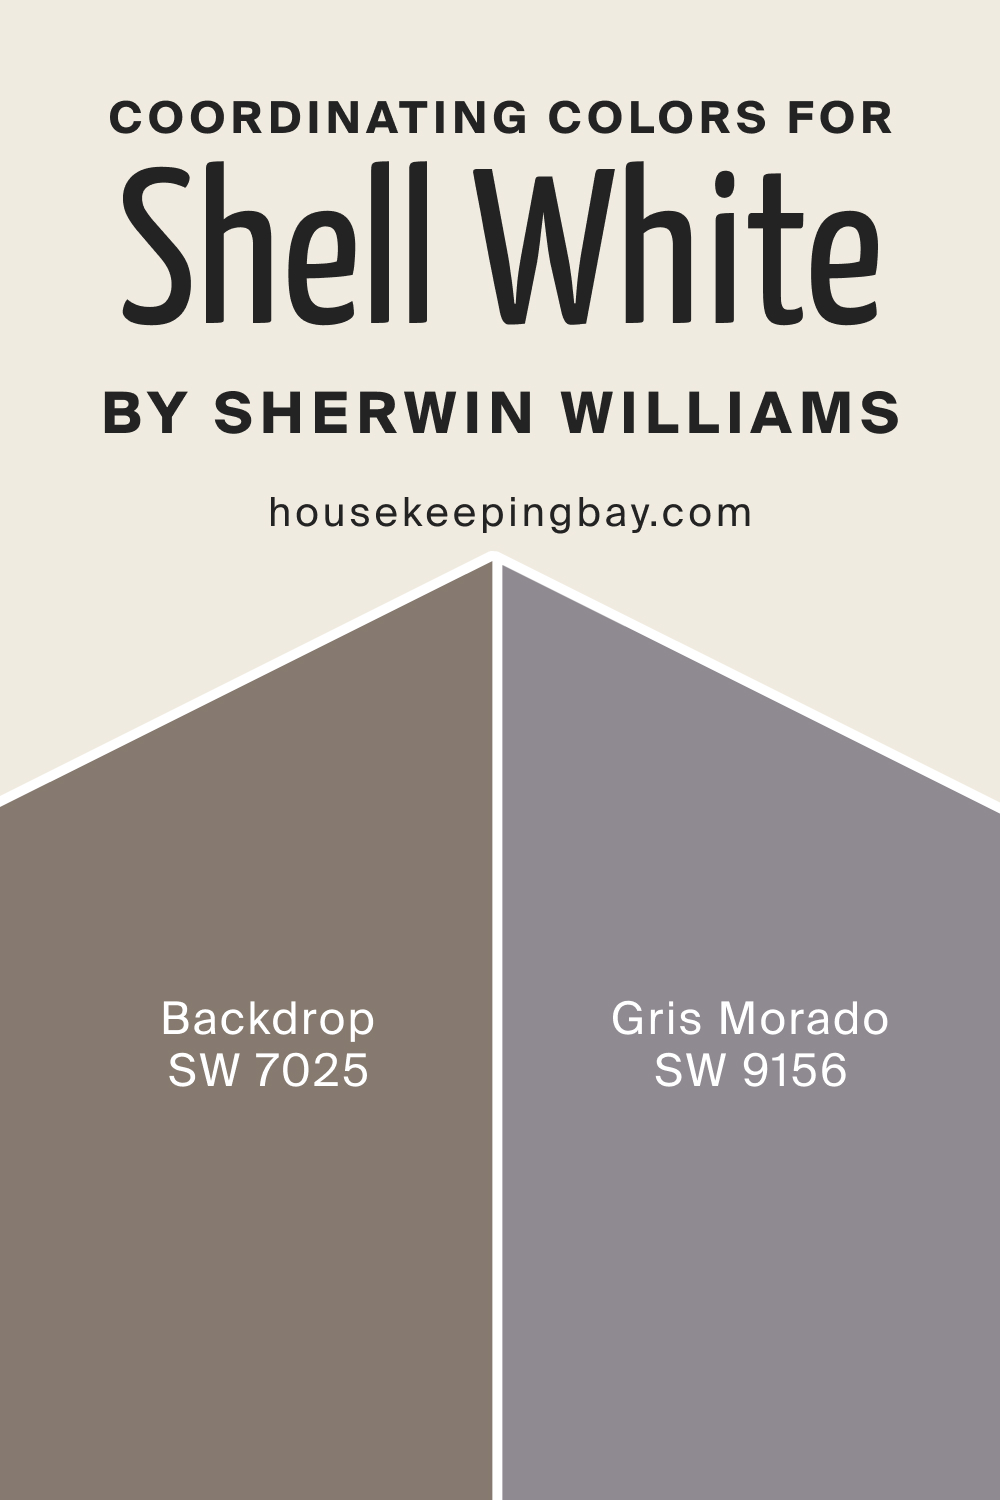 Coordinating Colors for SW Shell White by Sherwin Williams